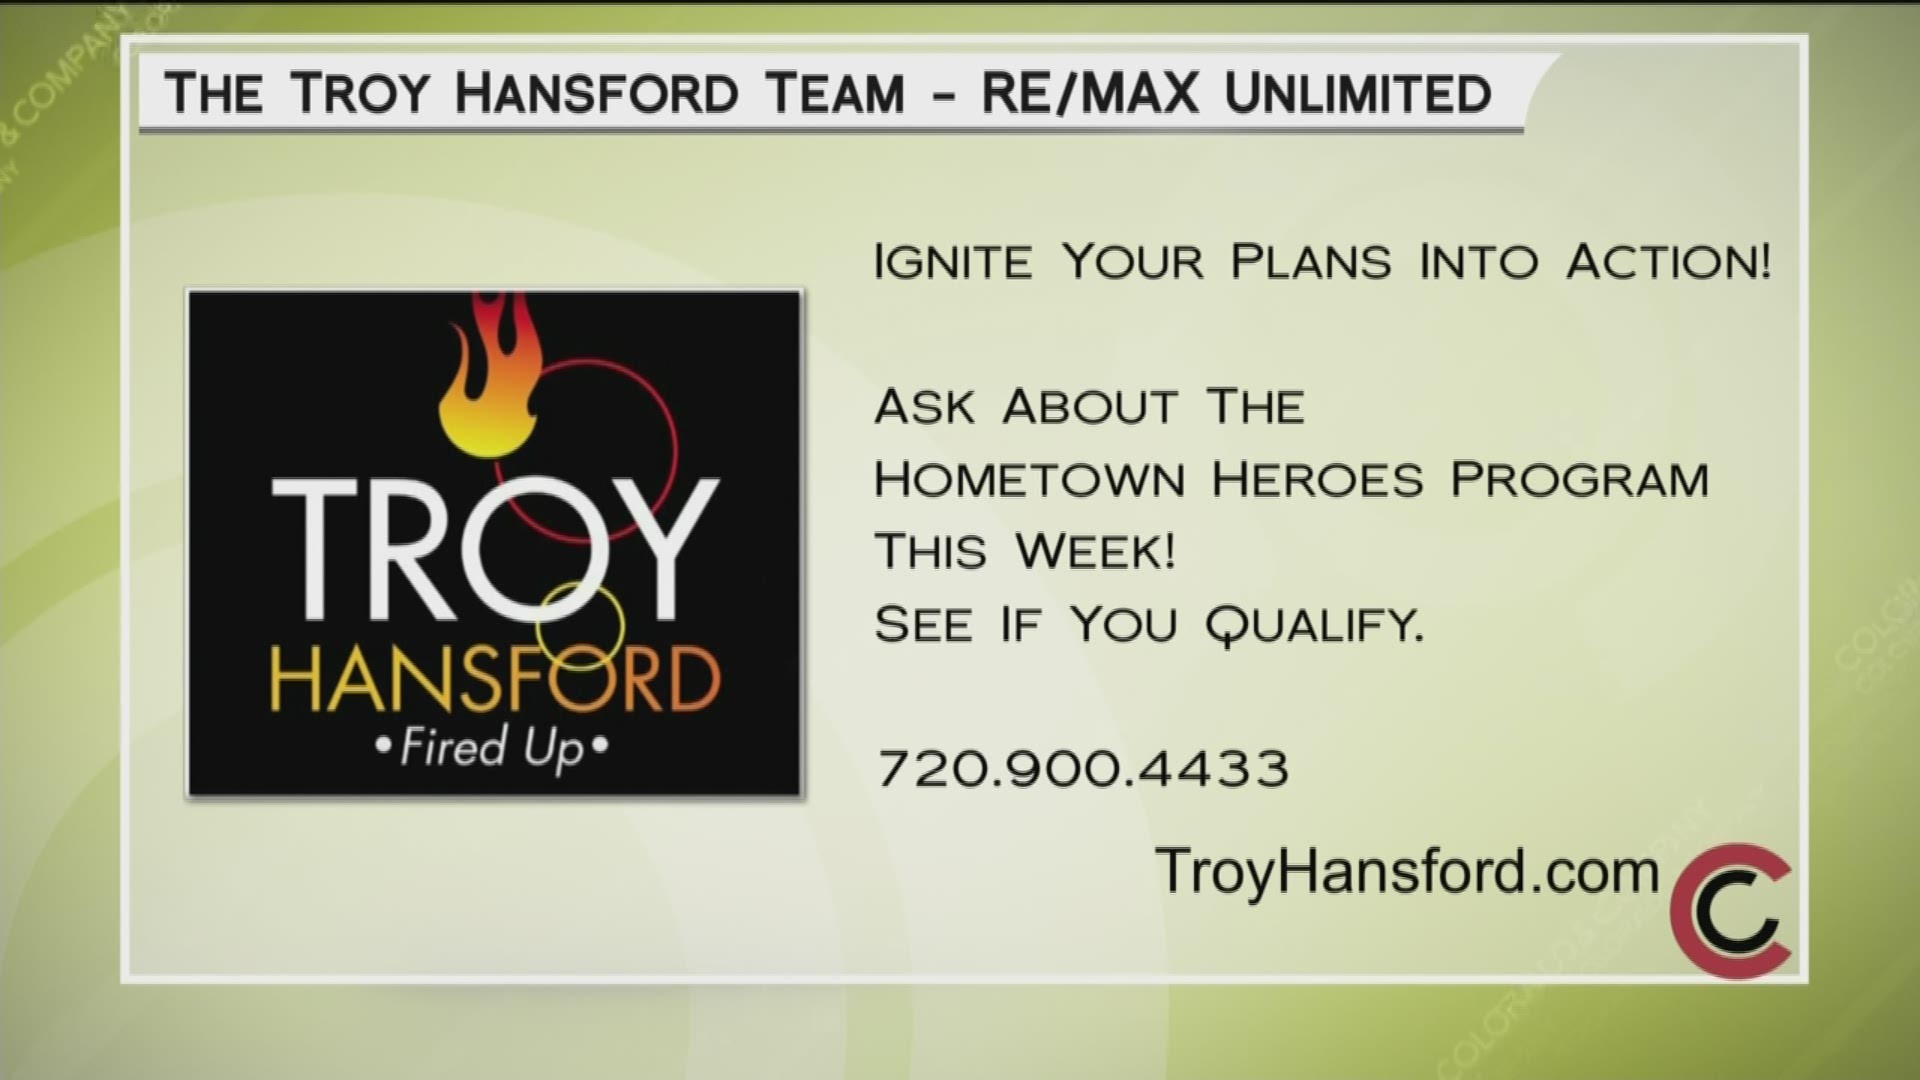 The Troy Hansford Team can ignite your real estate plans into action. Find out about their Hometown Heroes program. Call 720.900.4433 or visit TroyHansford.com.